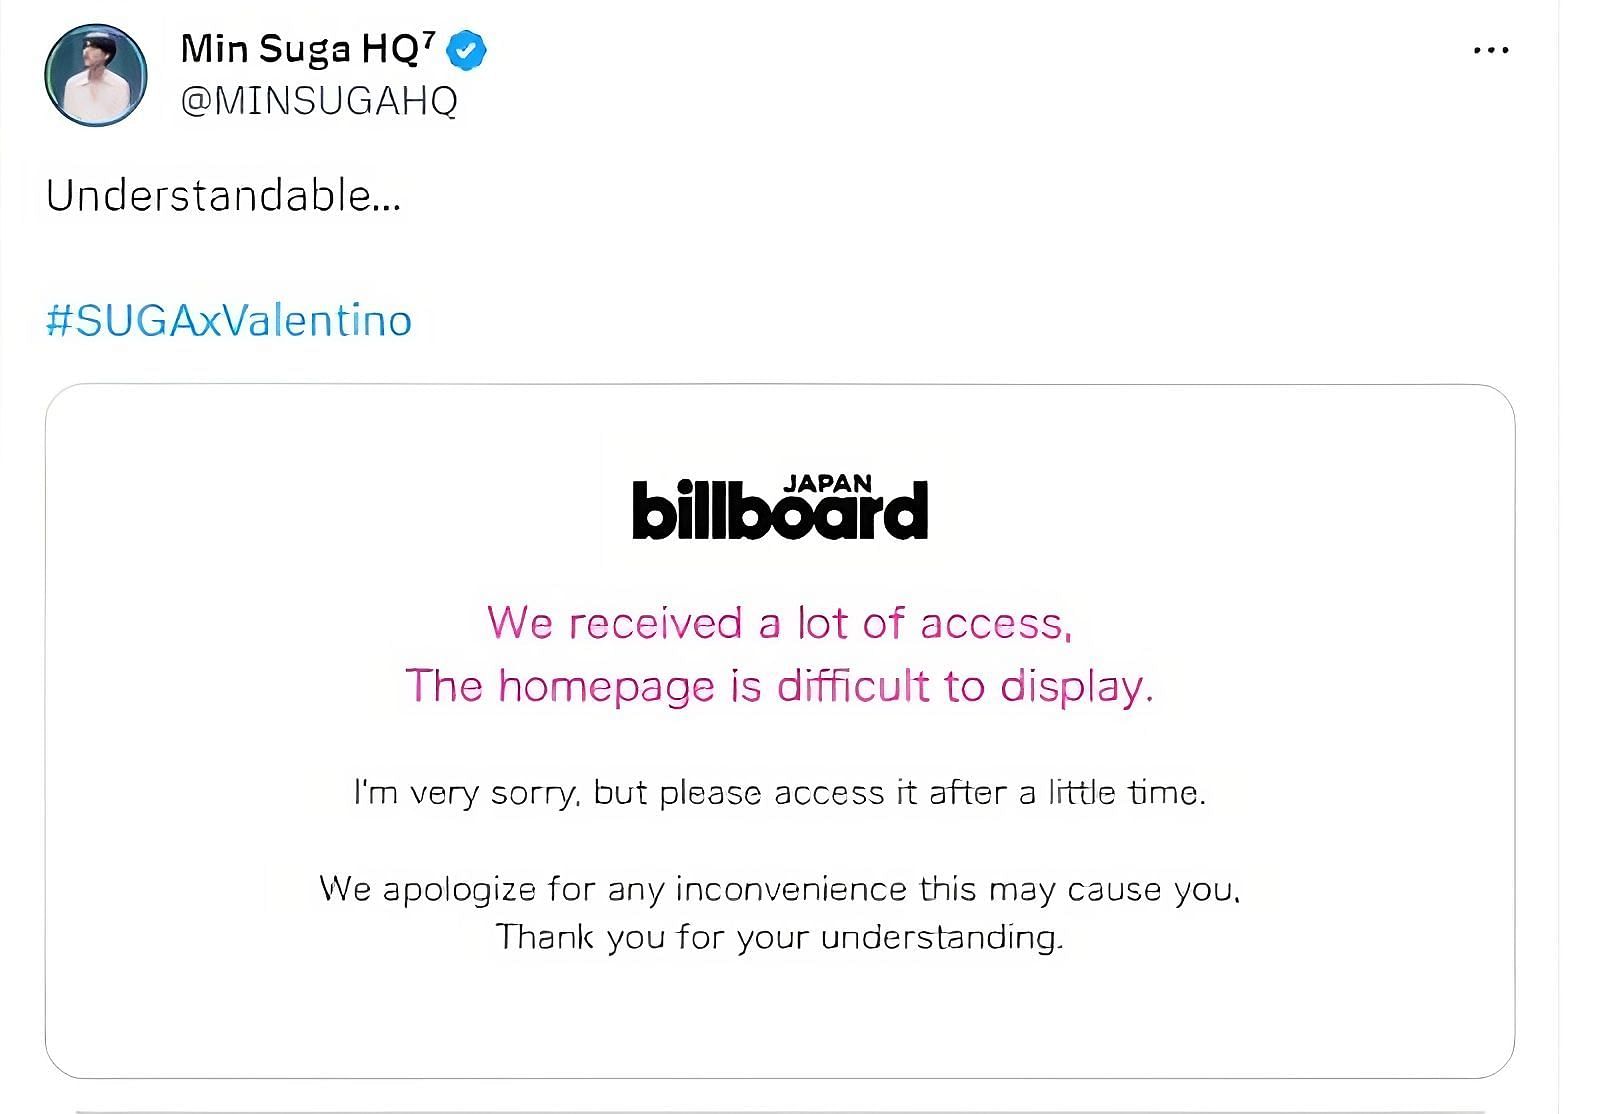 Fans react as server crashes following the release of Valentino Narratives campaign ad featuring BTS&#039; Suga (Image Via @minsugahq/X)